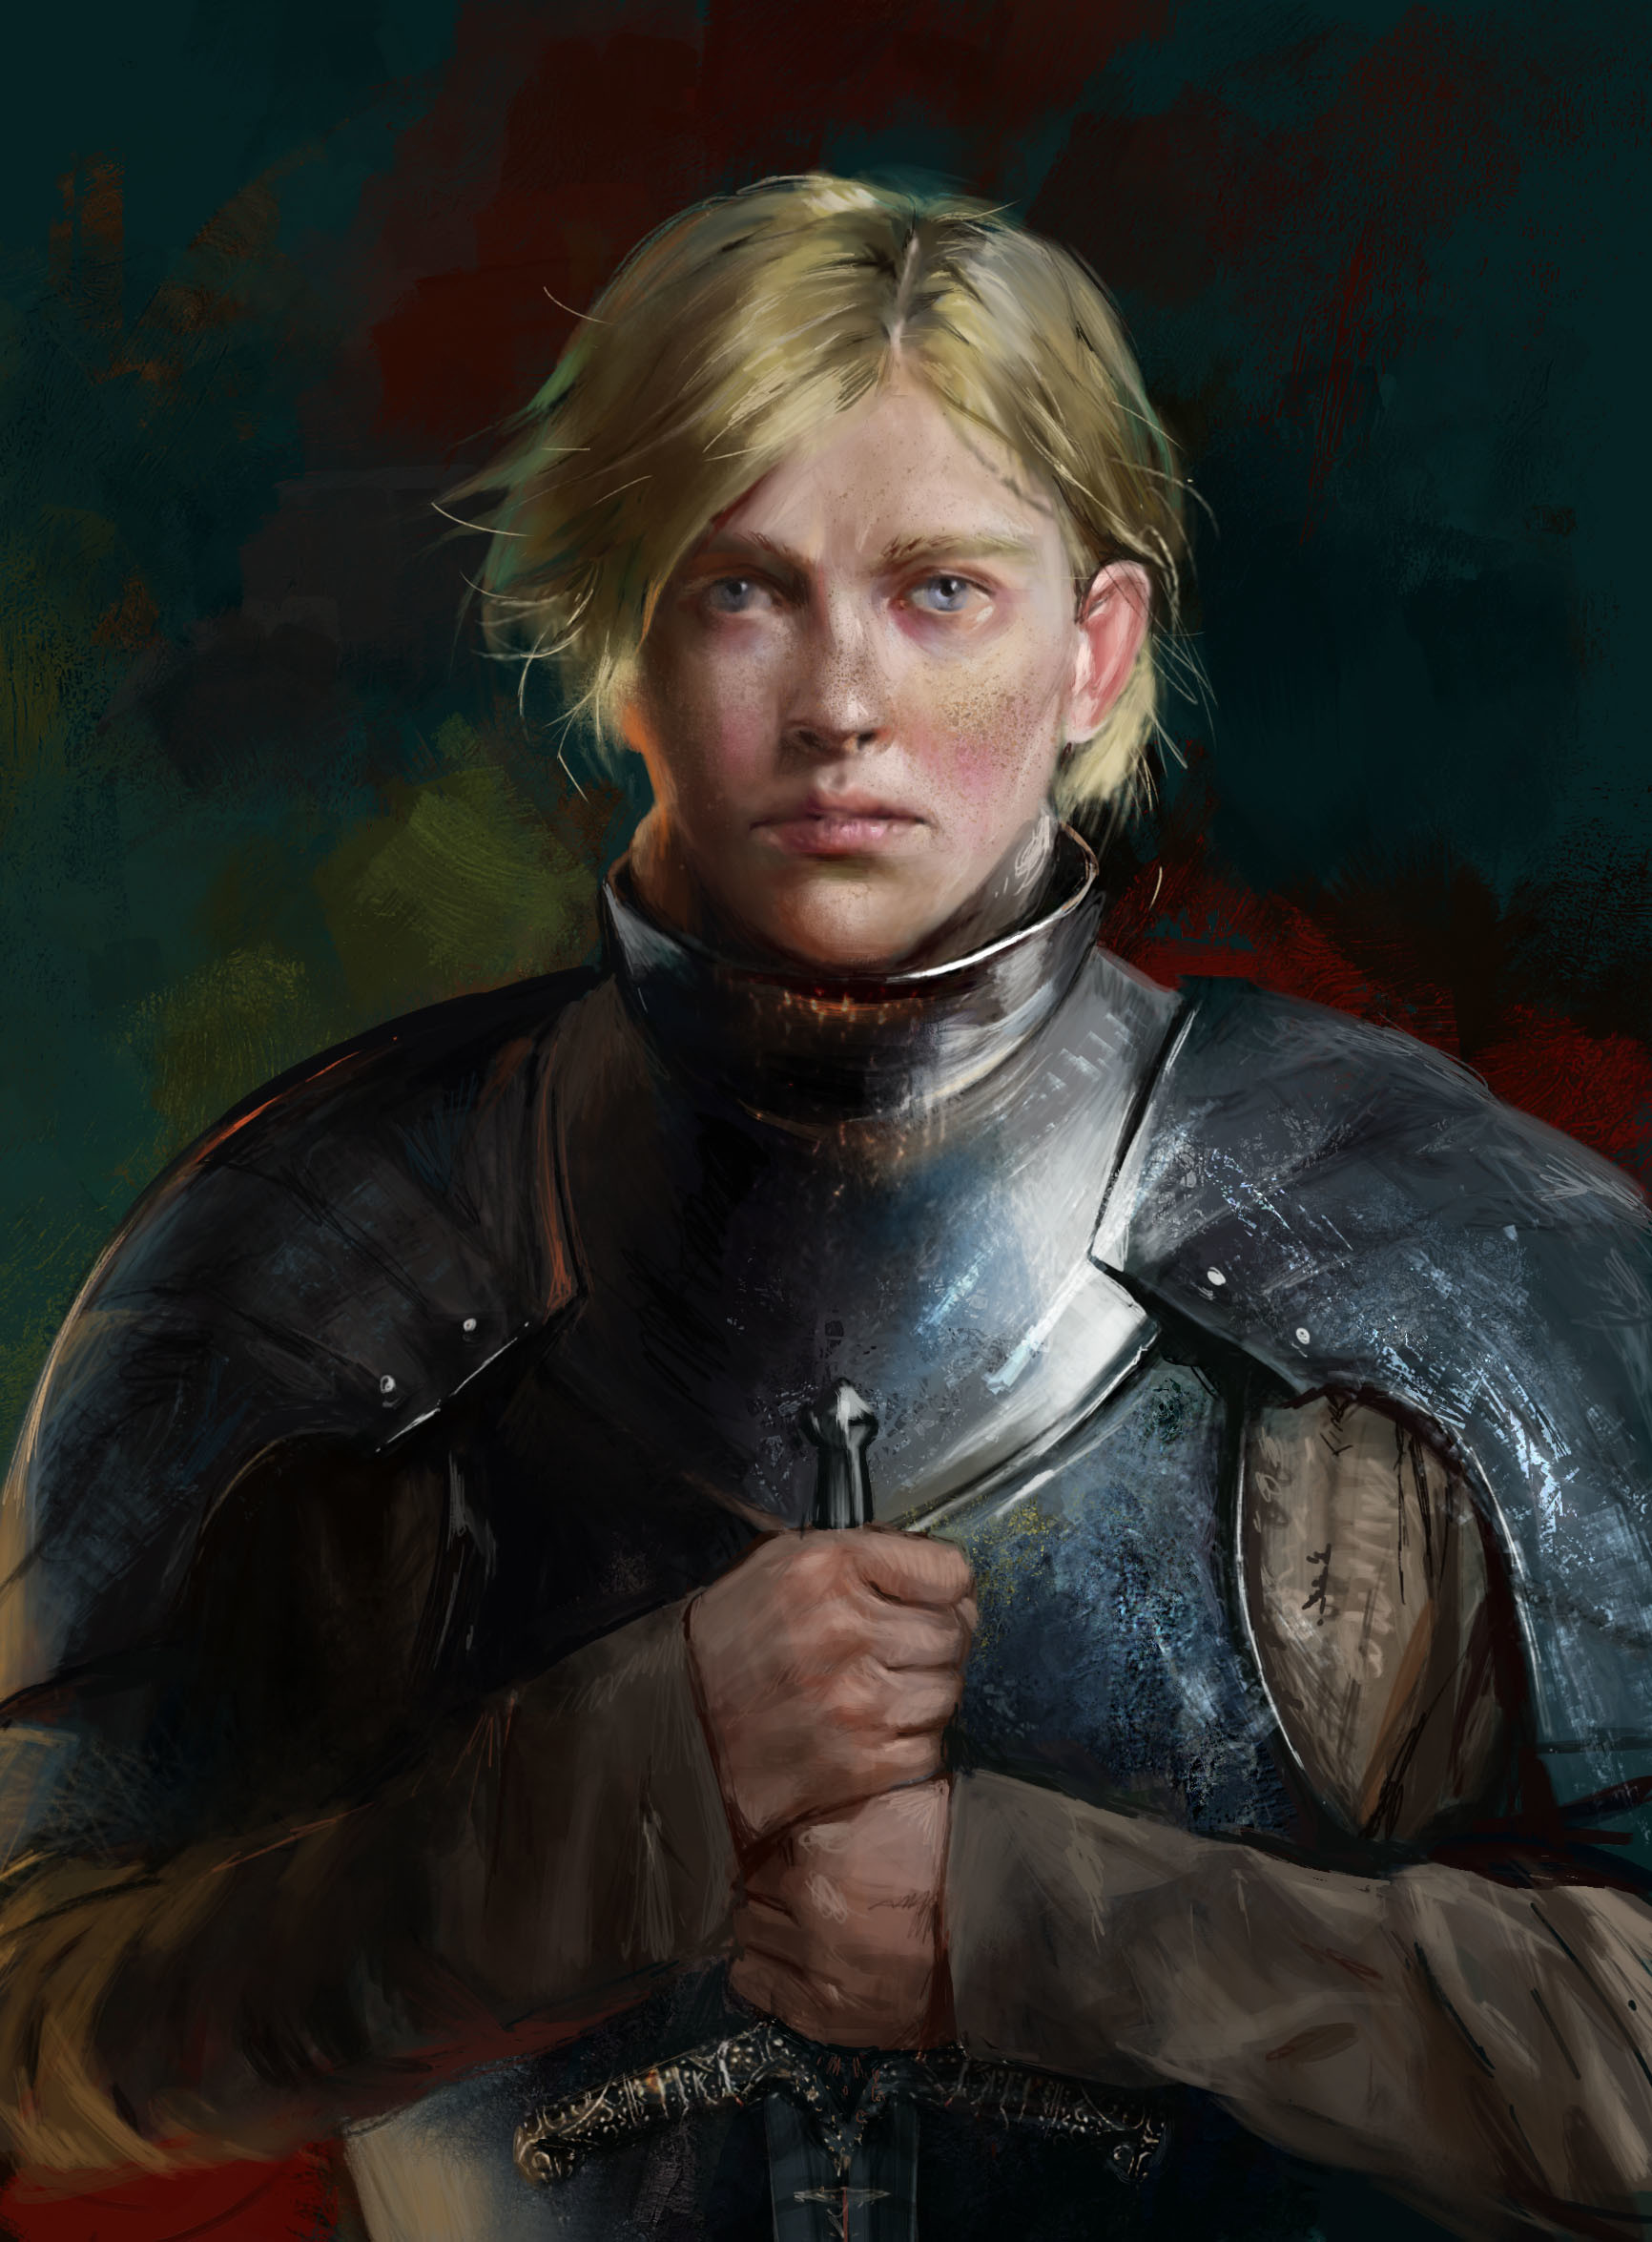 Shieldmaiden by Max Hugo. Could this be our Shieldmaiden? : r/forhonor